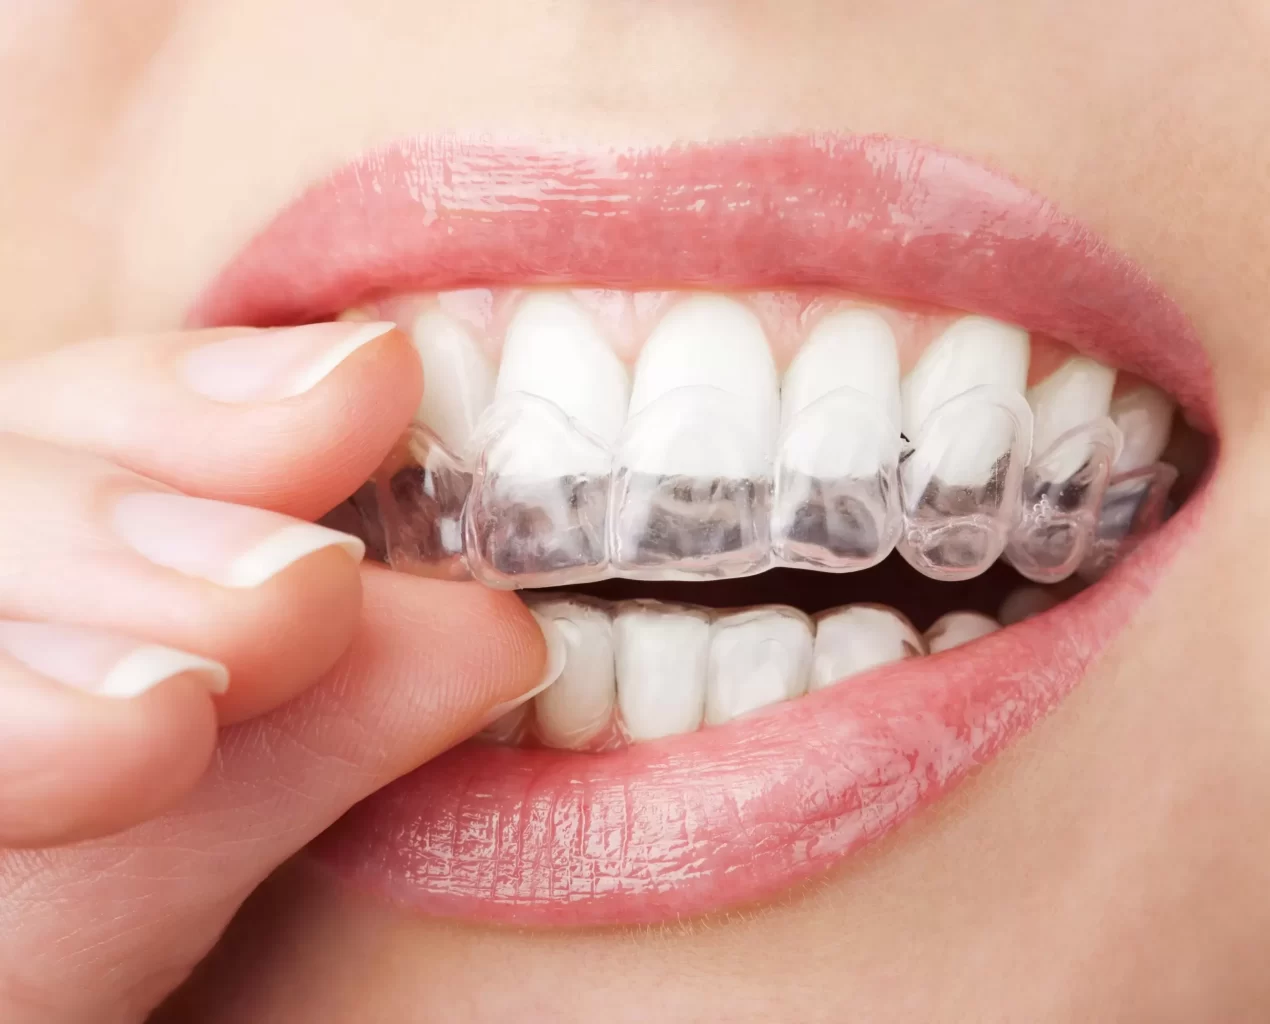 Woman putting Invisalign aligner in her mouth